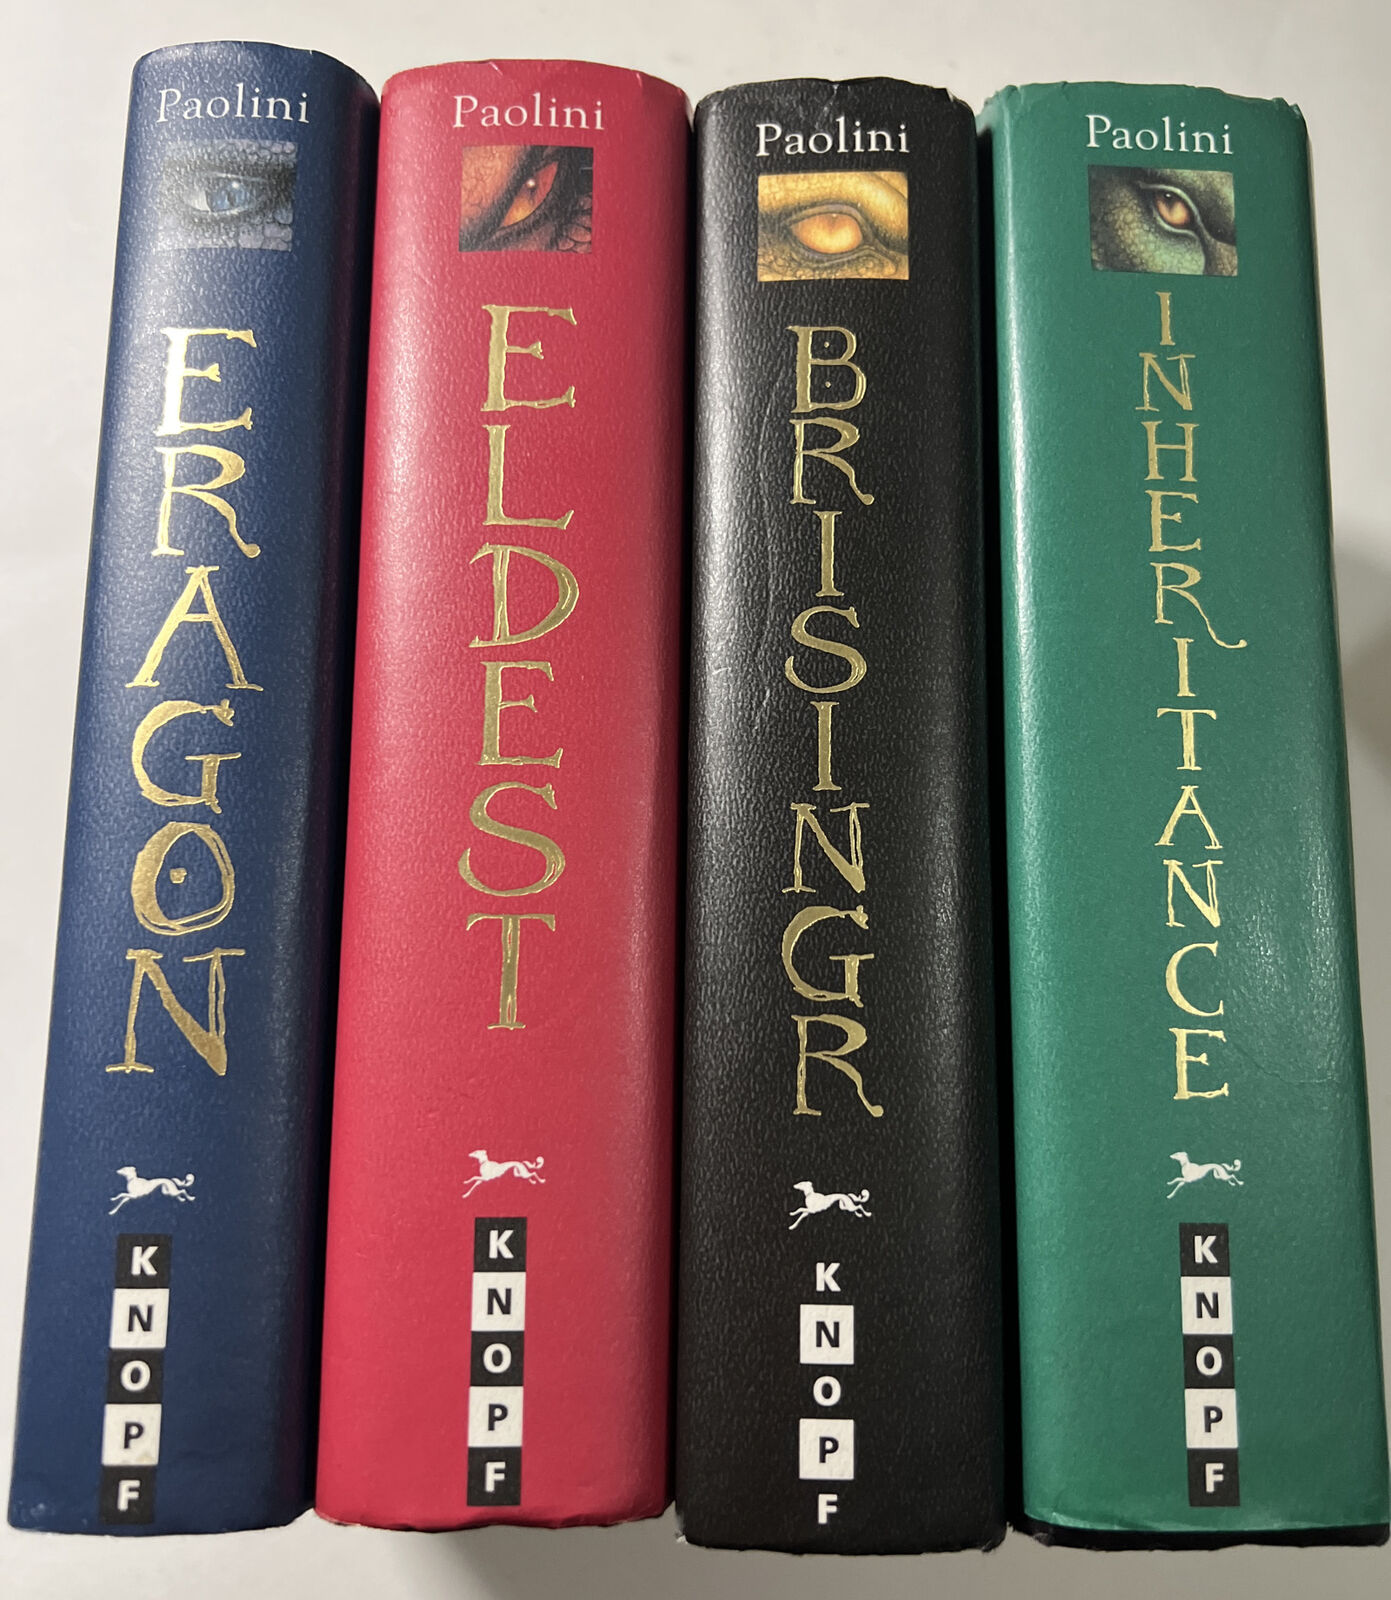 Eragon Inheritance Cycle Series Complete Set 1-4 HC Paolini  3 First Ed  VG